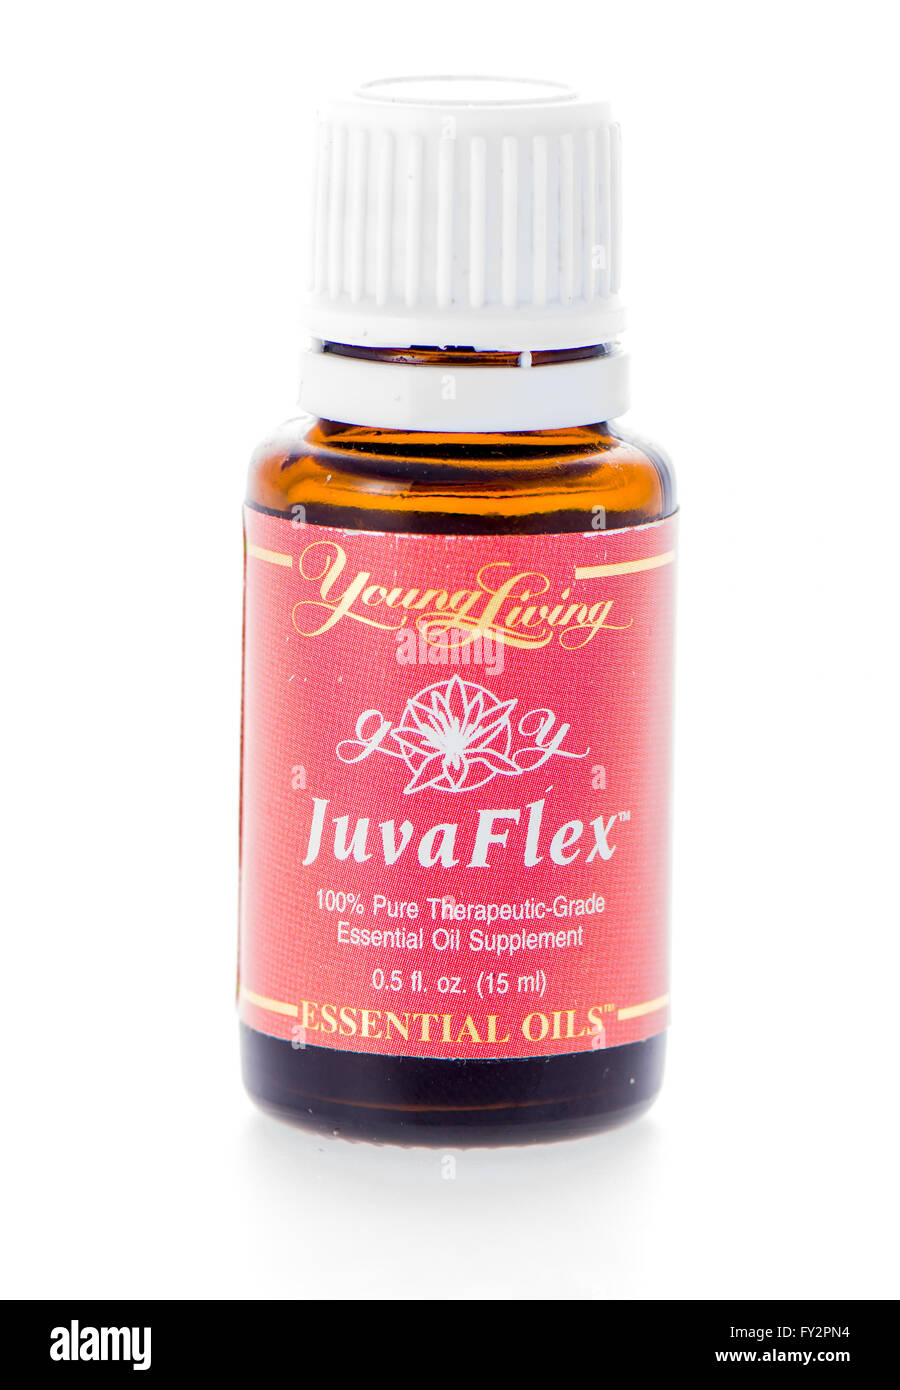 Winneconne, WI - 19 February 2015: Bottle of Young Living JuvaFlex  essential oil supplement Stock Photo - Alamy